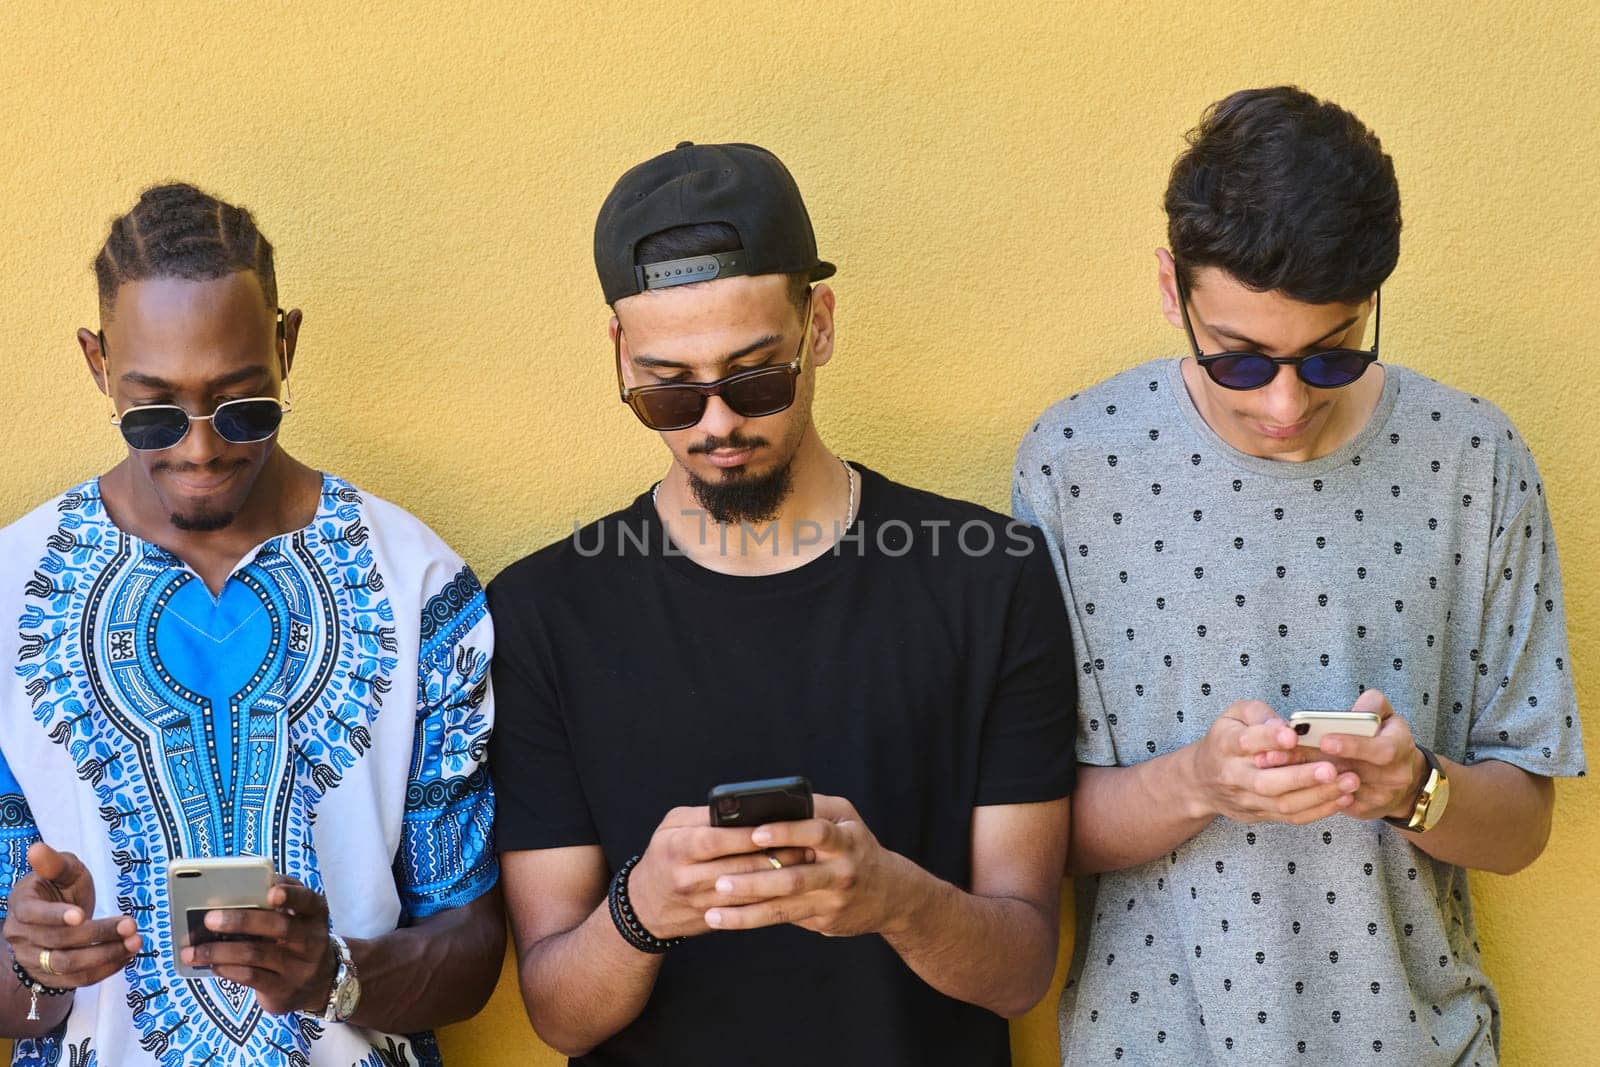 A diverse group of teenagers standing together against a wall, engrossed in their smartphones, showcasing modern connectivity and social interaction.